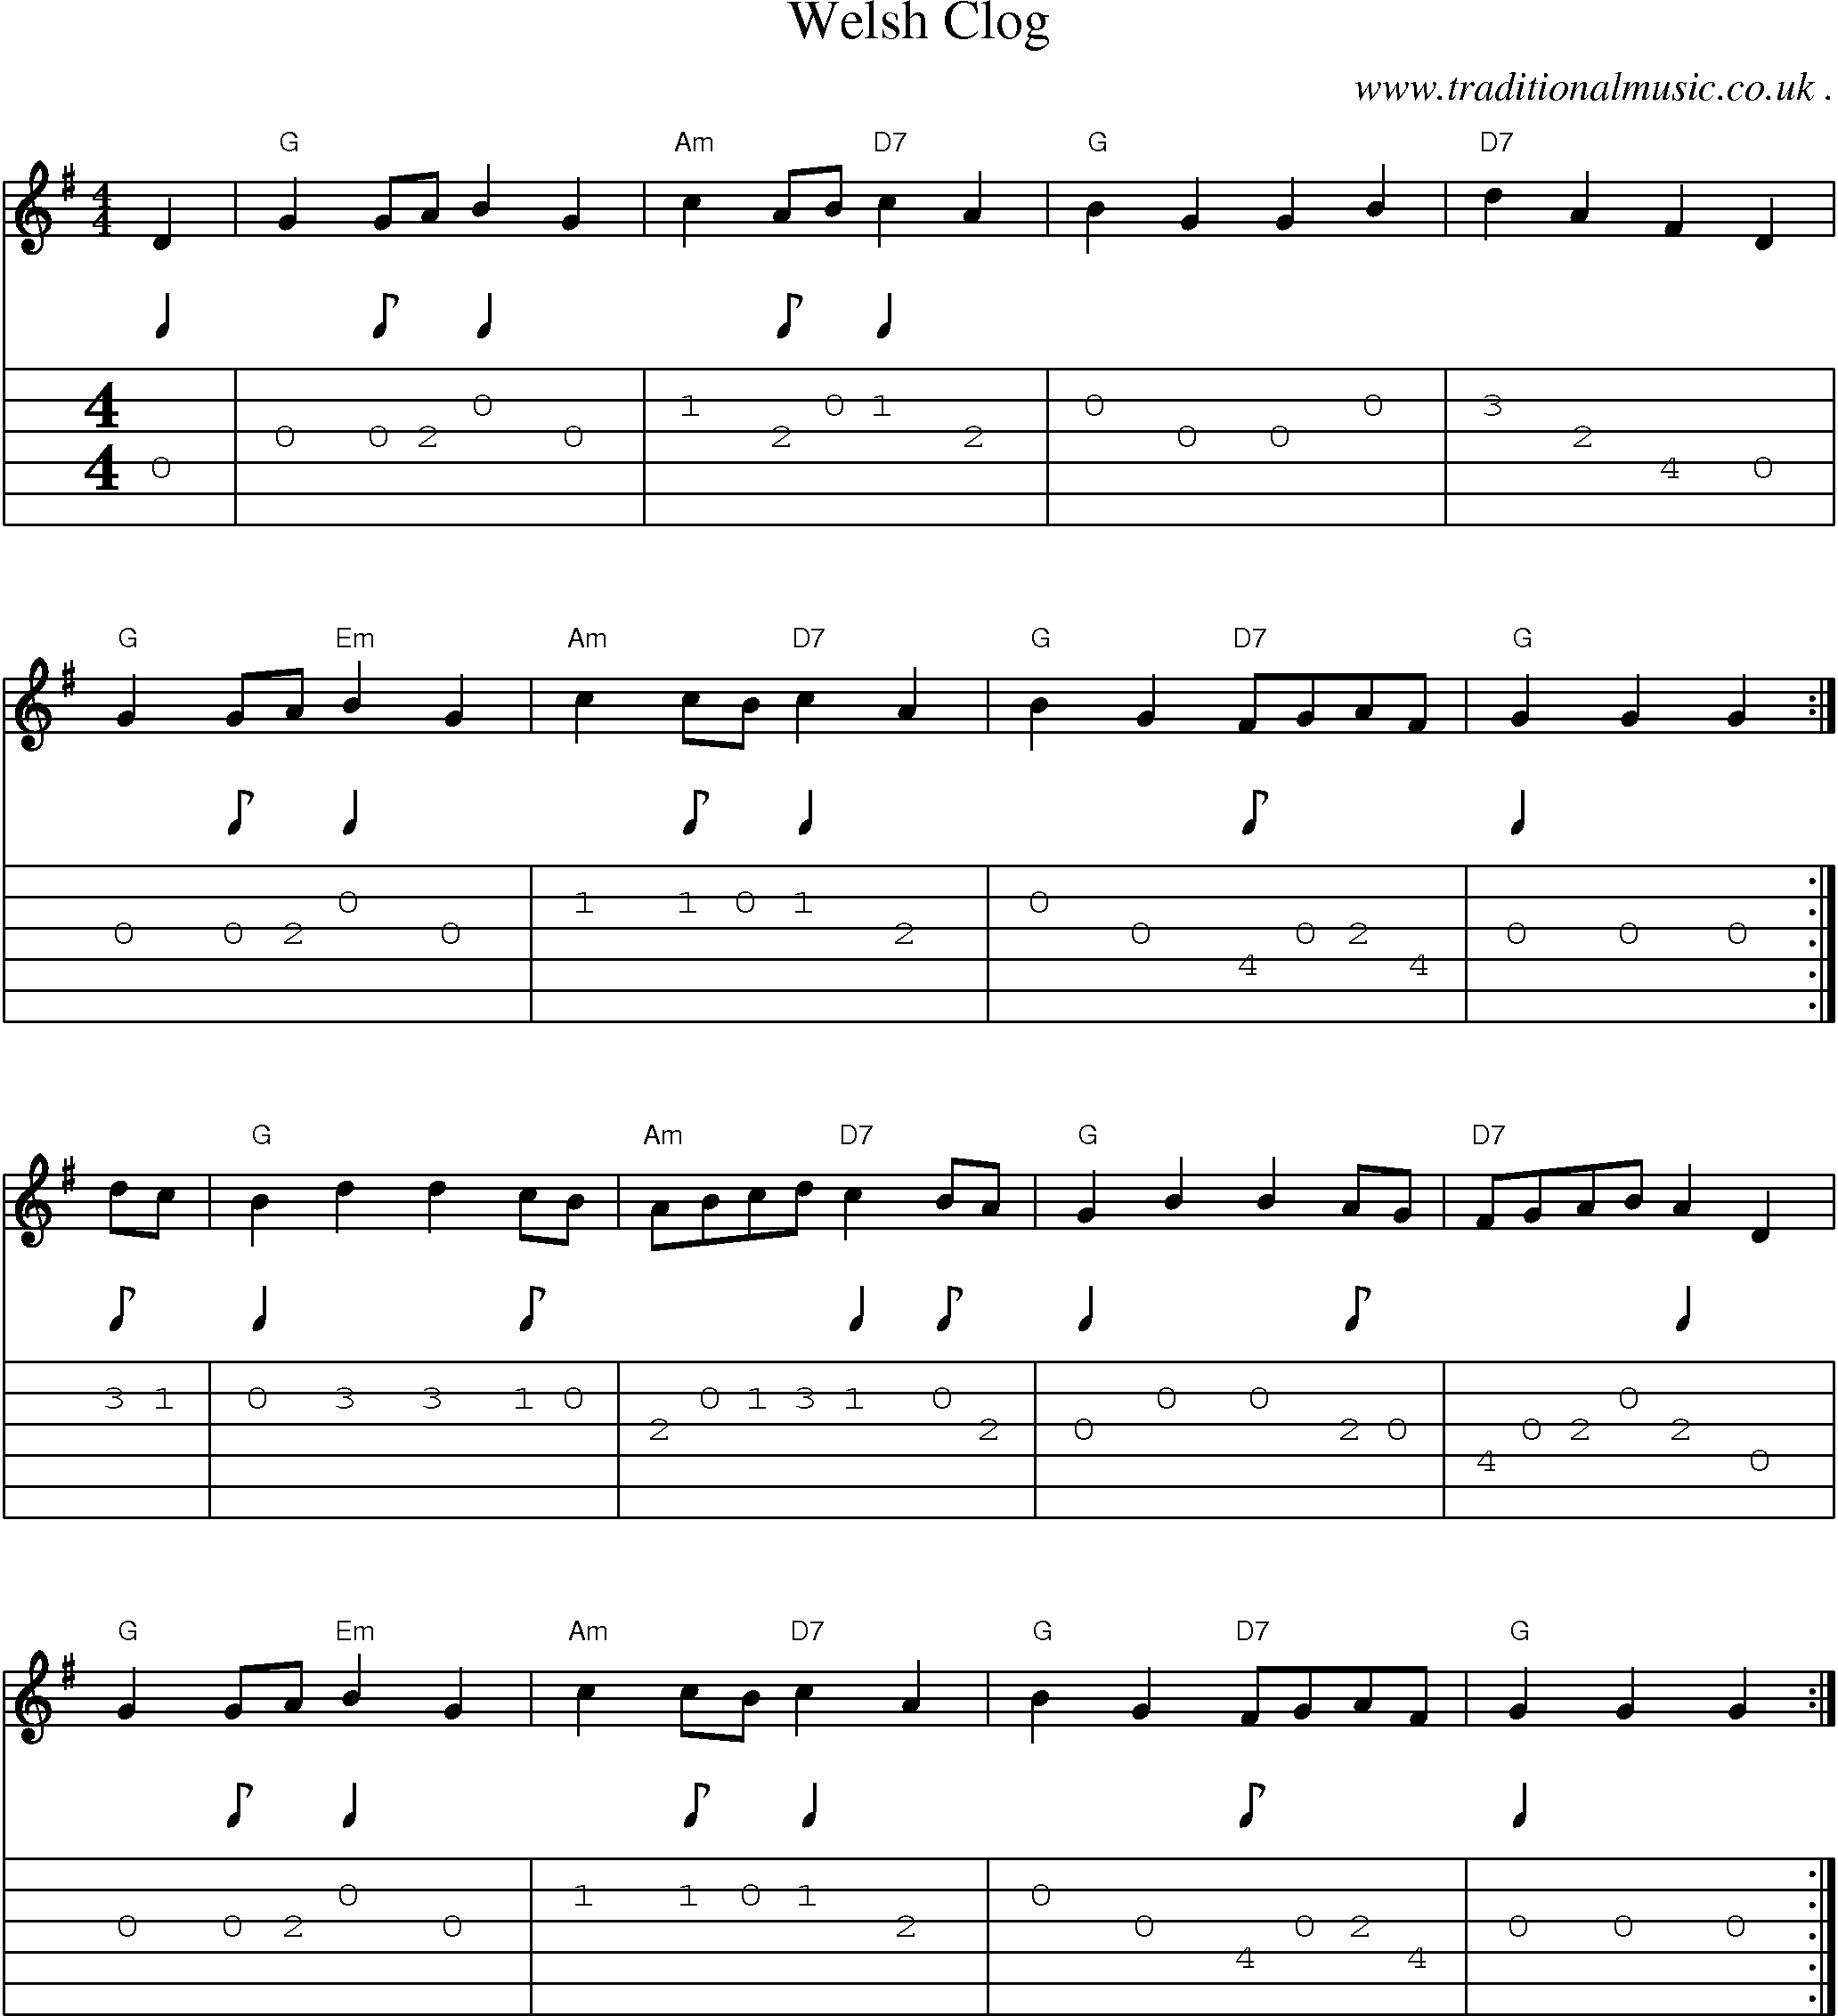 Sheet-Music and Guitar Tabs for Welsh Clog